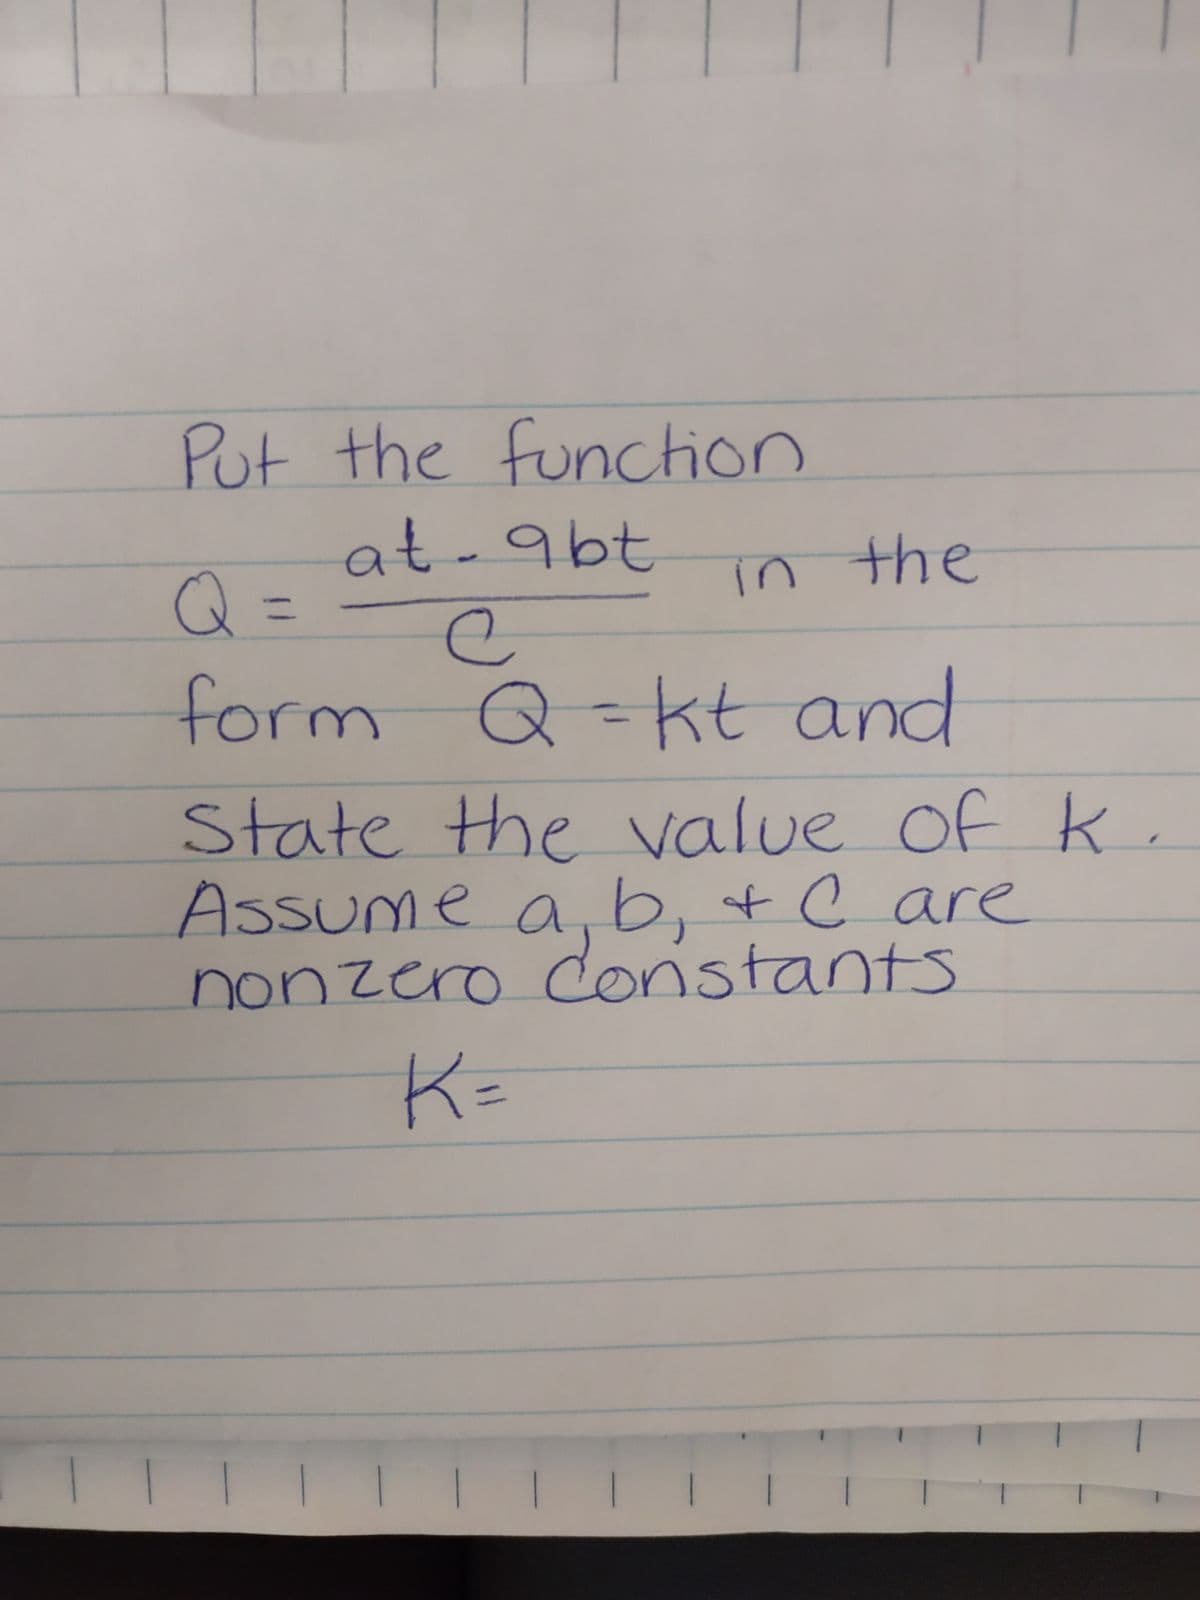 Put the function
at - abt
in the
Q =
е
form Q = kt and
State the value of k
Assume a, b, +& Care
nonzero Constants
K =